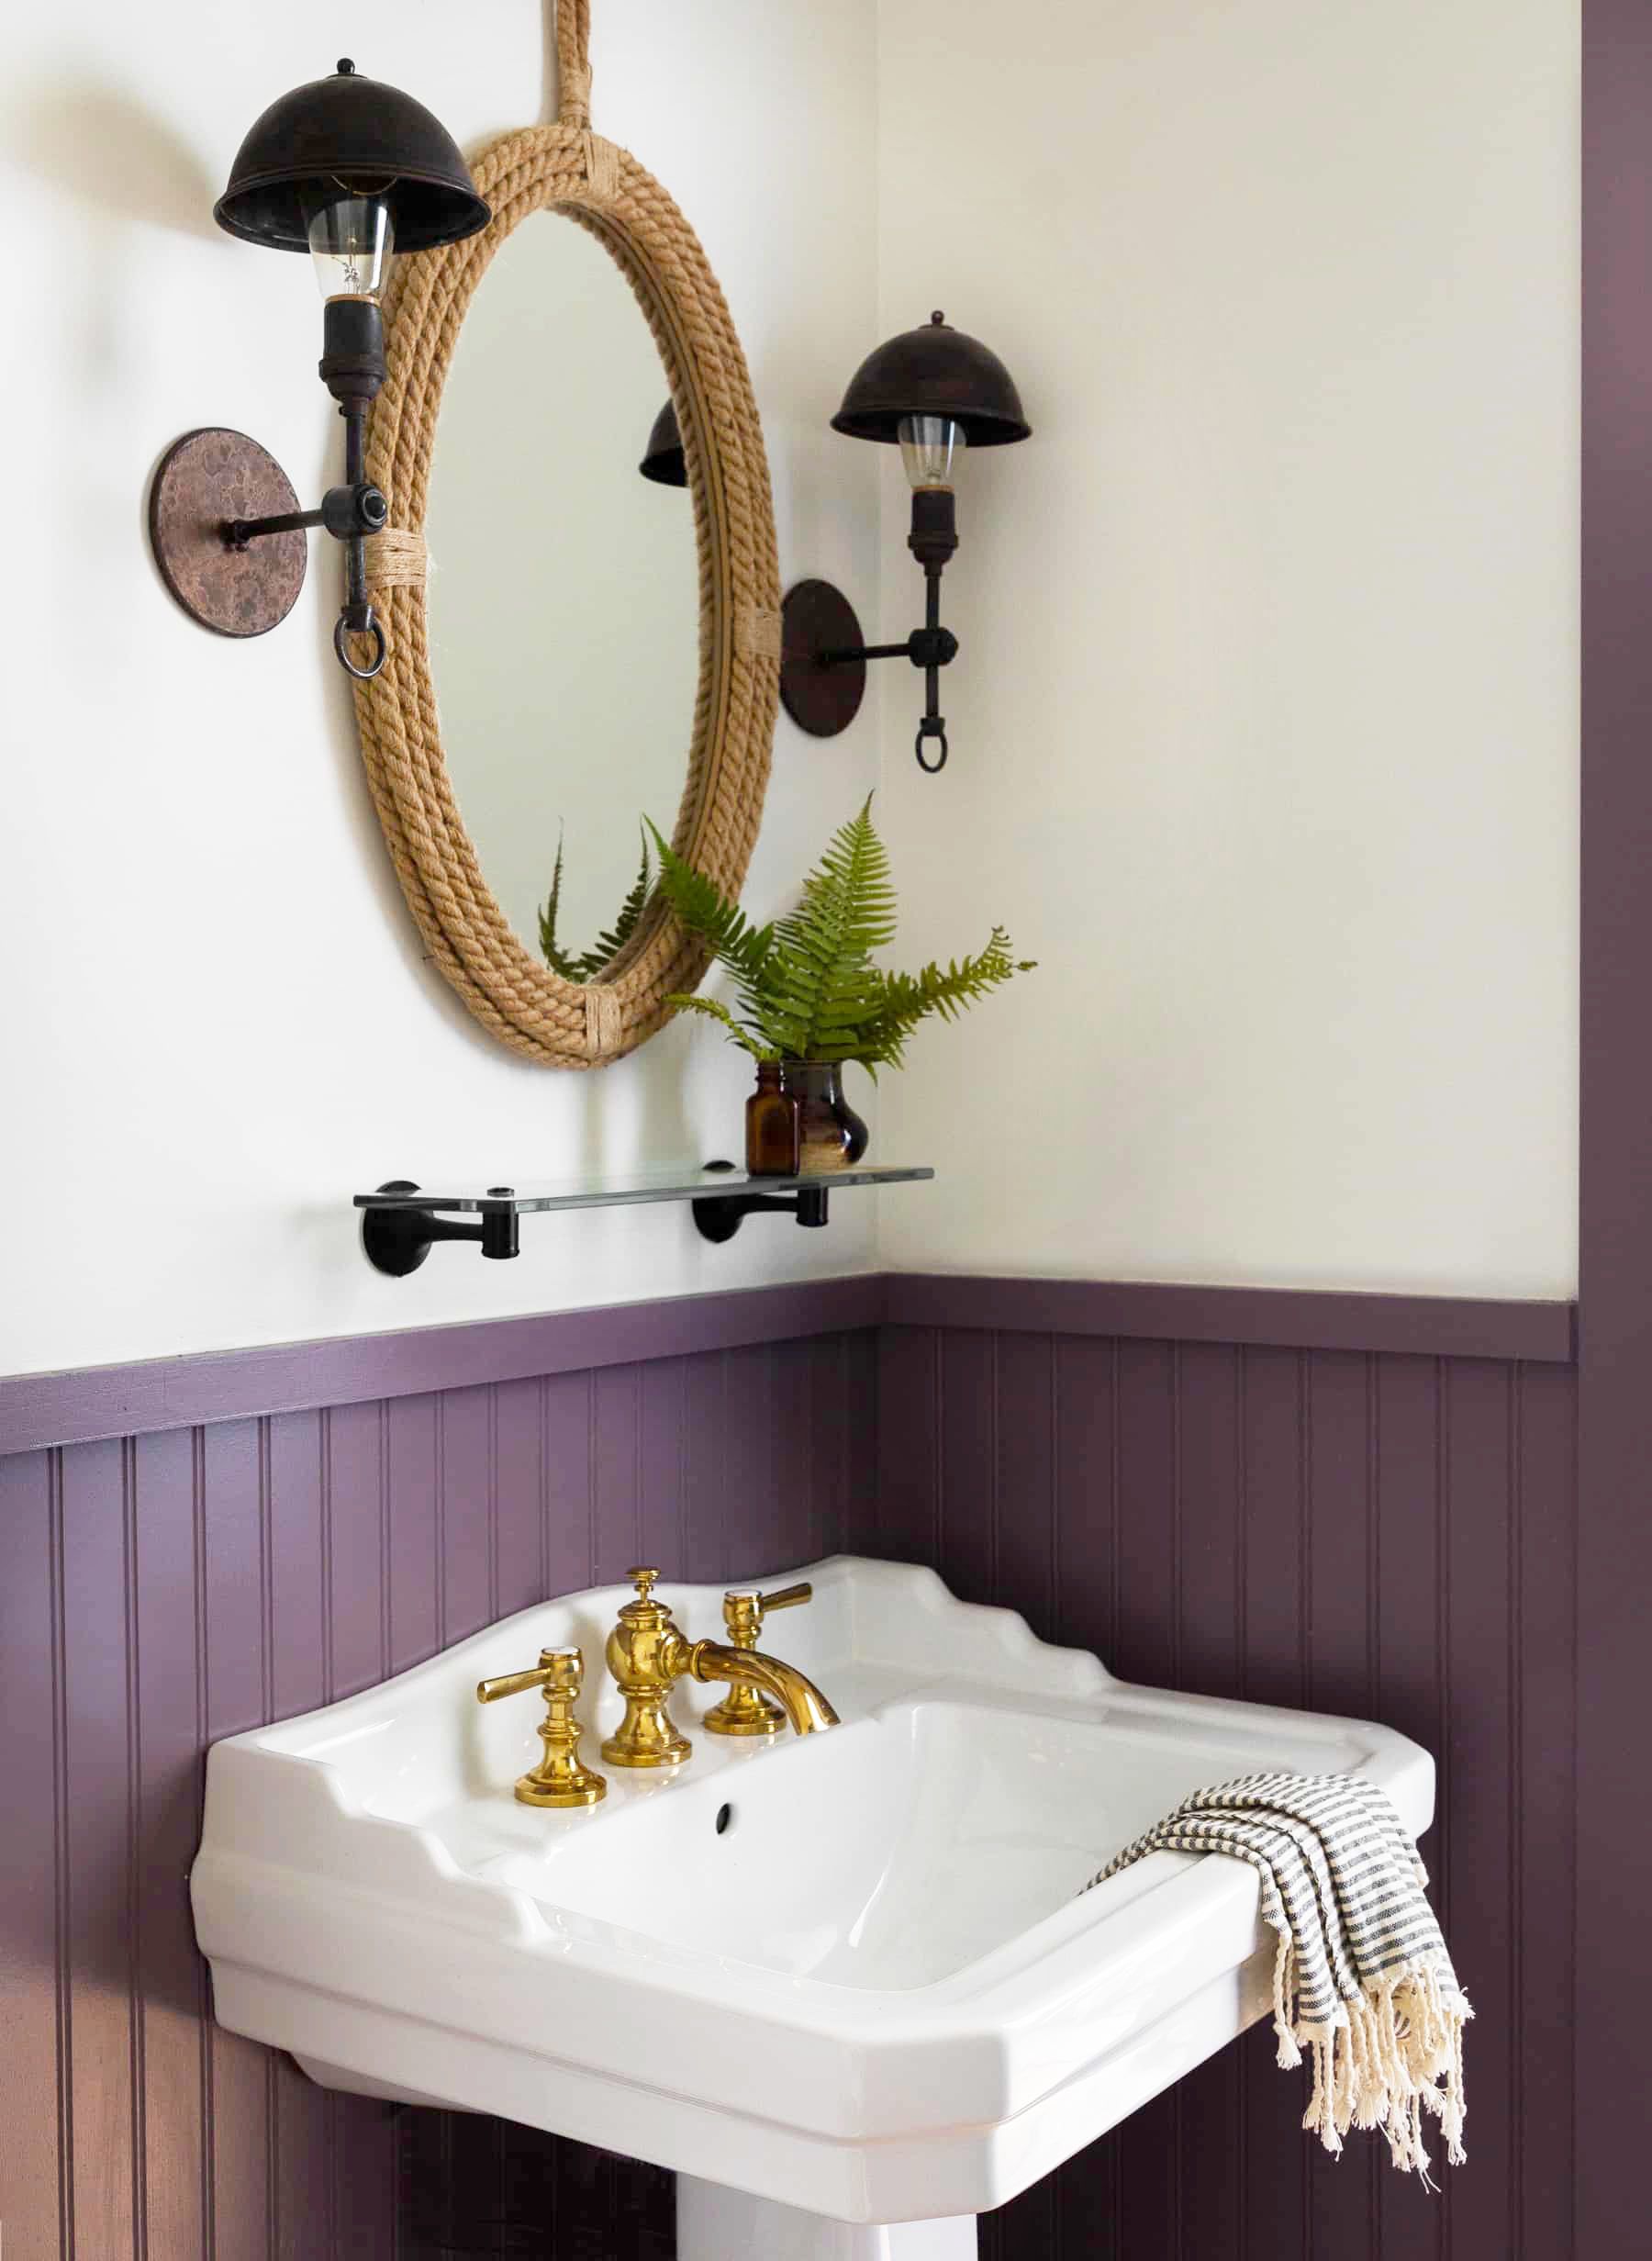 Find Bathroom Color Ideas and Order Online With The Home Depot | Behr